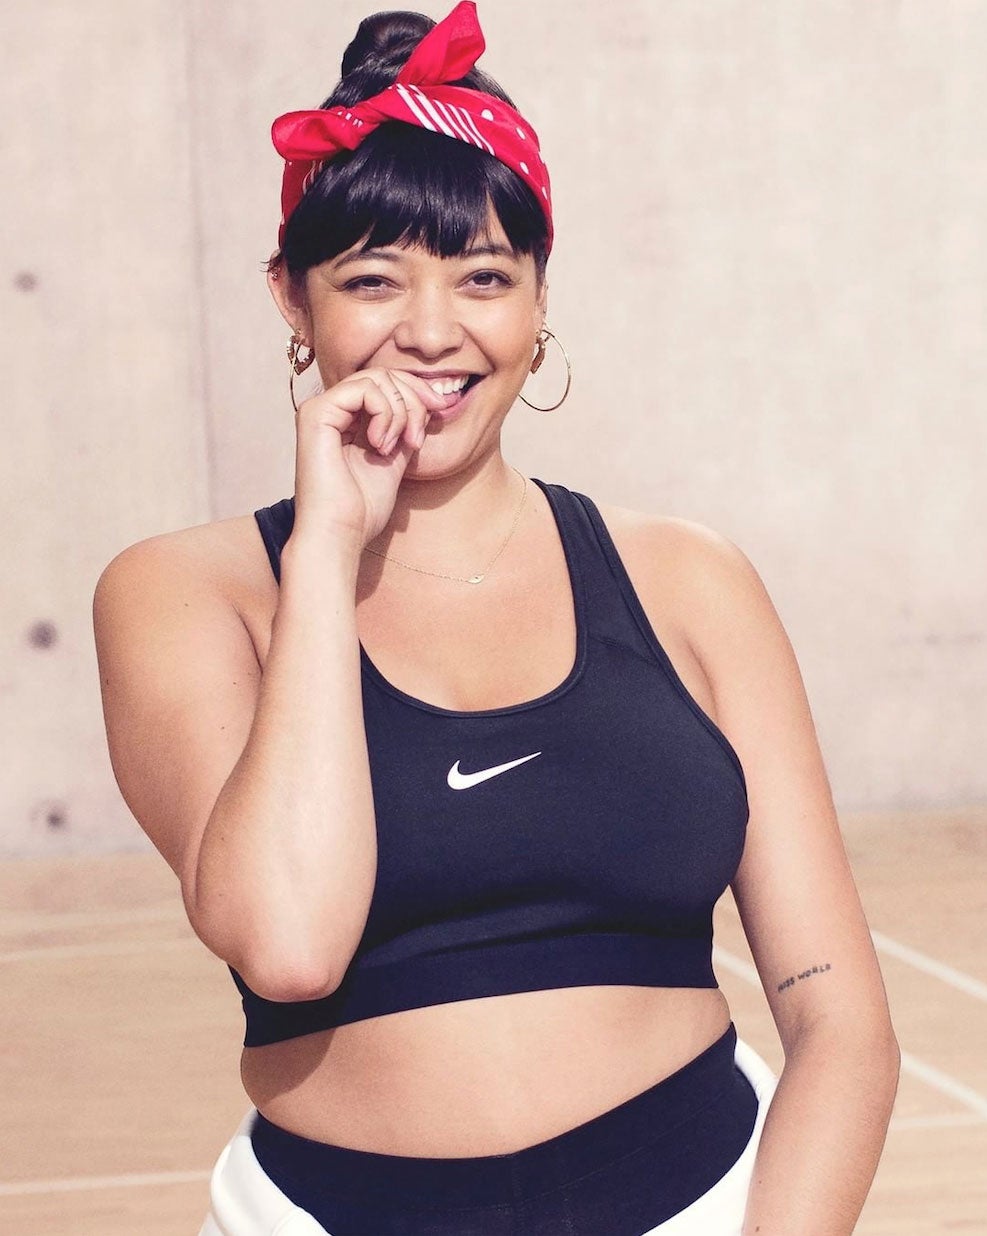 Nike Just Launched the 1X - 3X Workout Line of Your Dreams